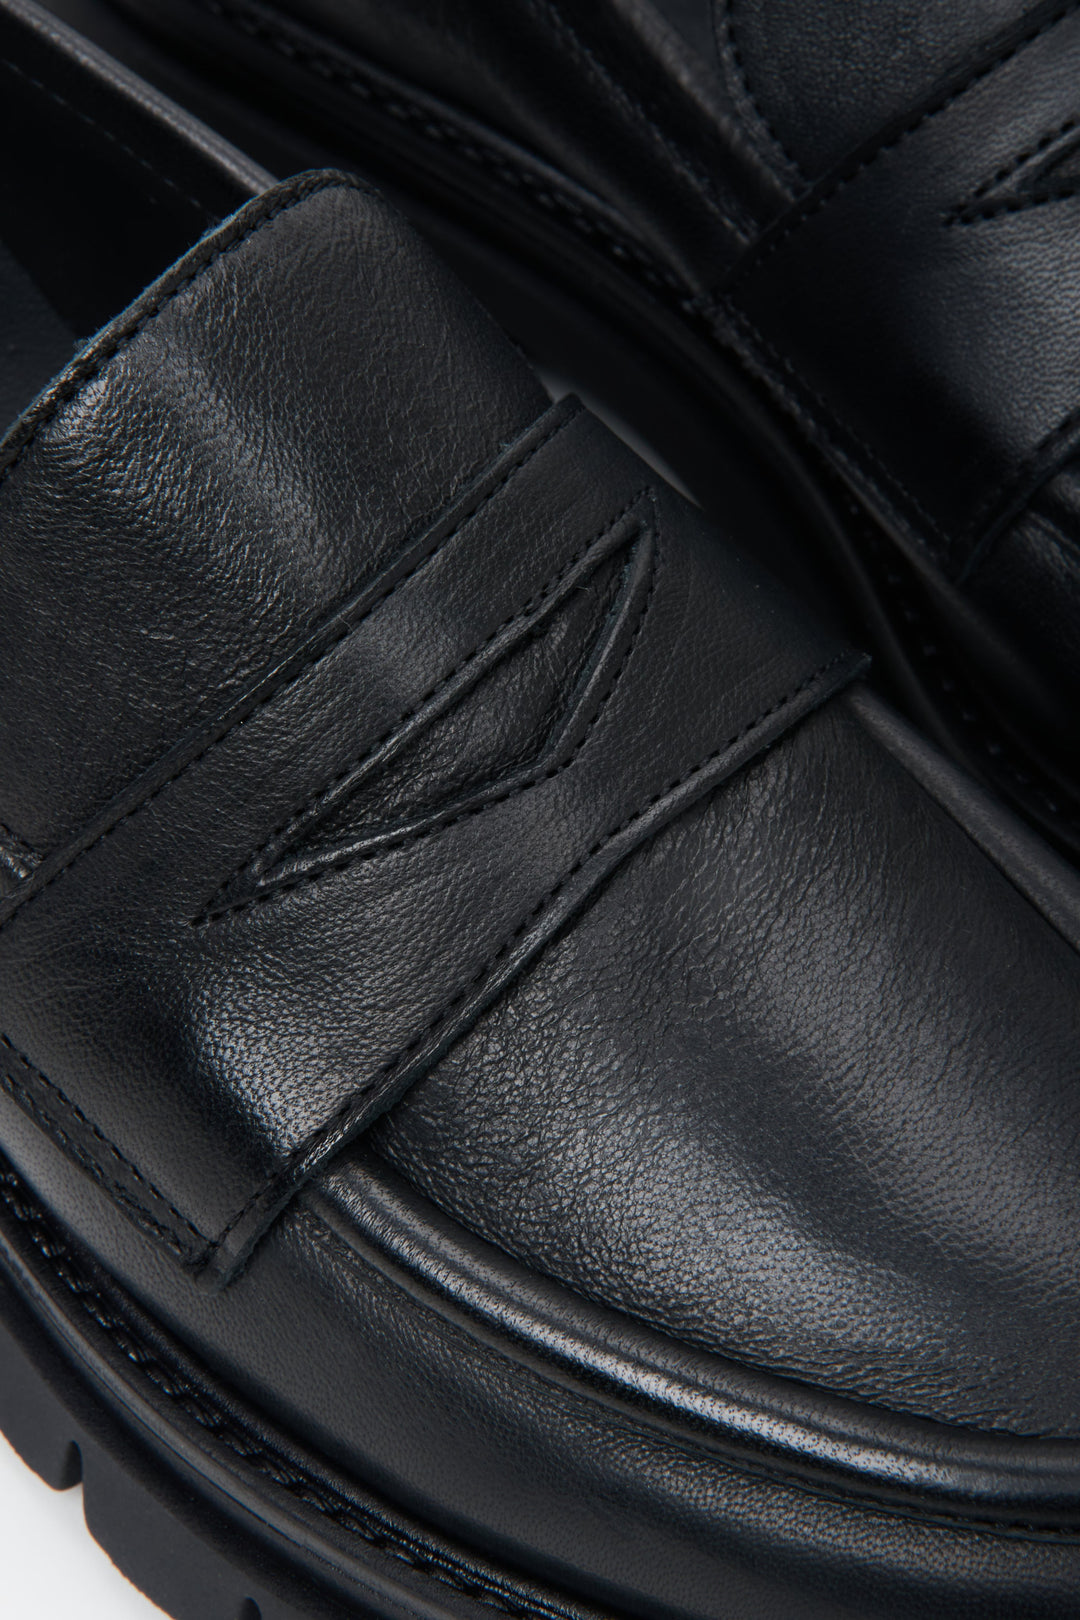 Women's slip-on penny loafers in black - close-up on the details.